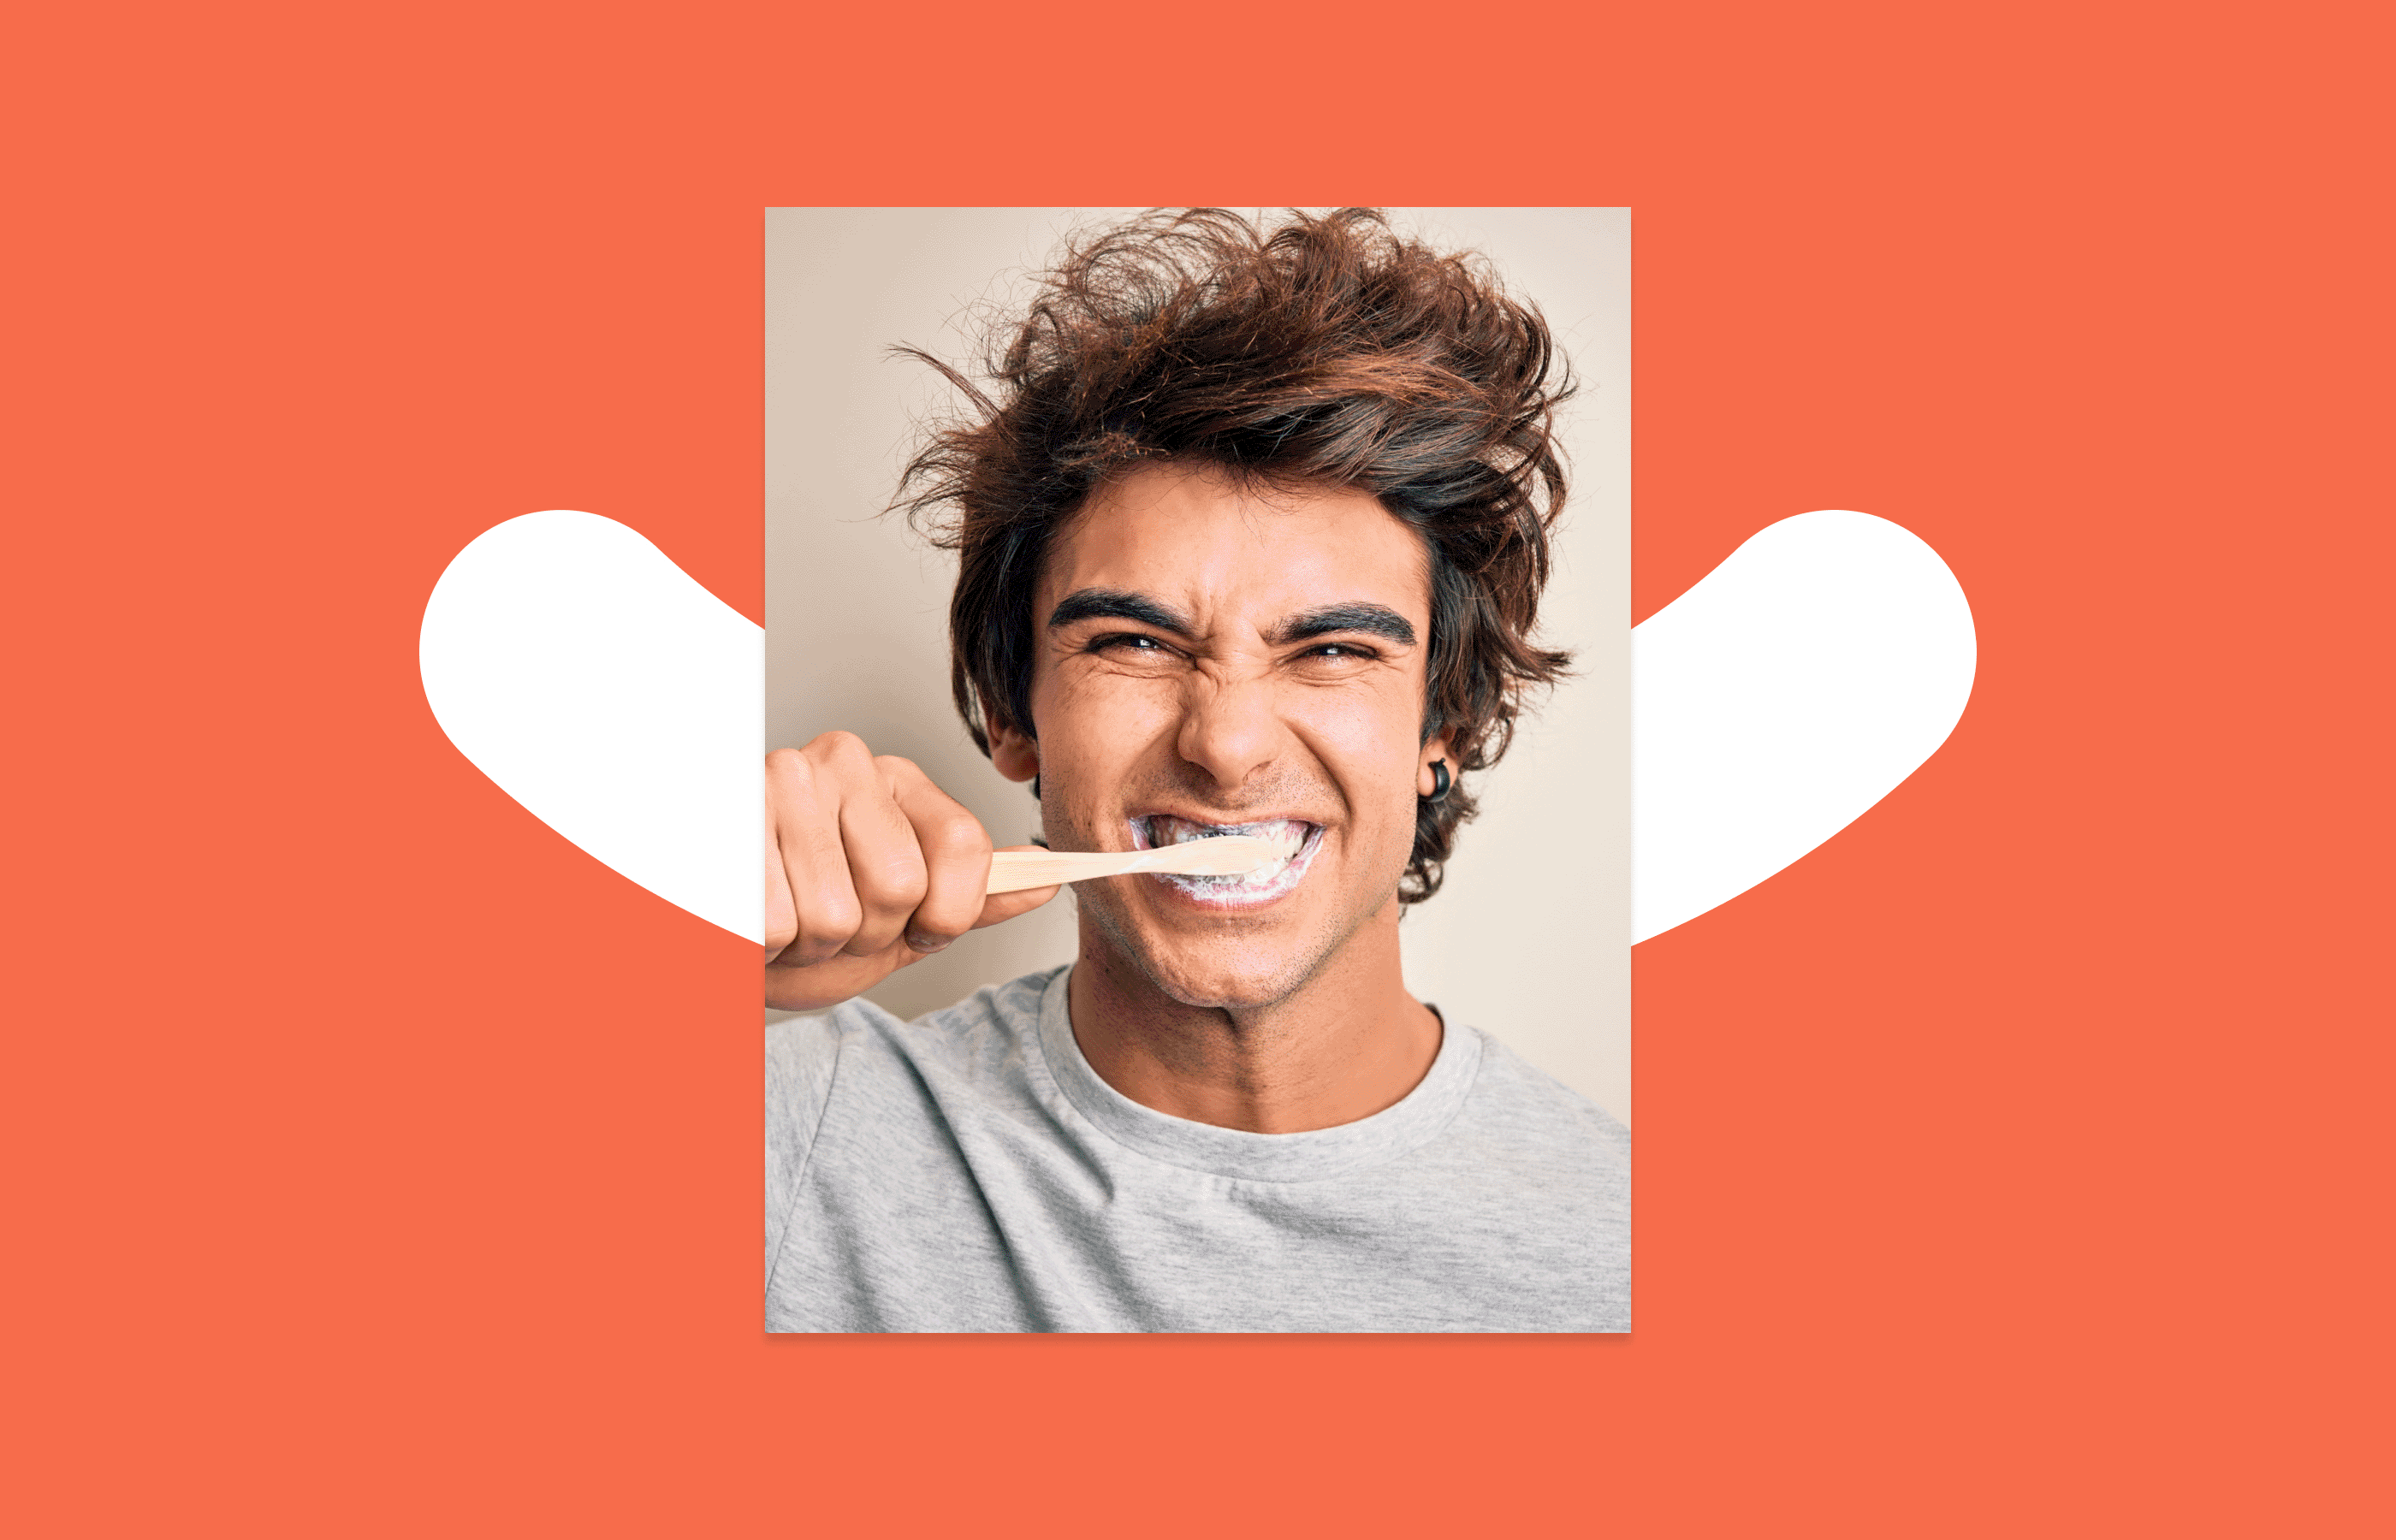 GIF of two alternating images. The first is of a man with brown hair and a gray sweater brushing his teeth. The man has a smile on his face. The second photo is of the same man with the toothbrush in a different place in his mouth. The alternation of the 